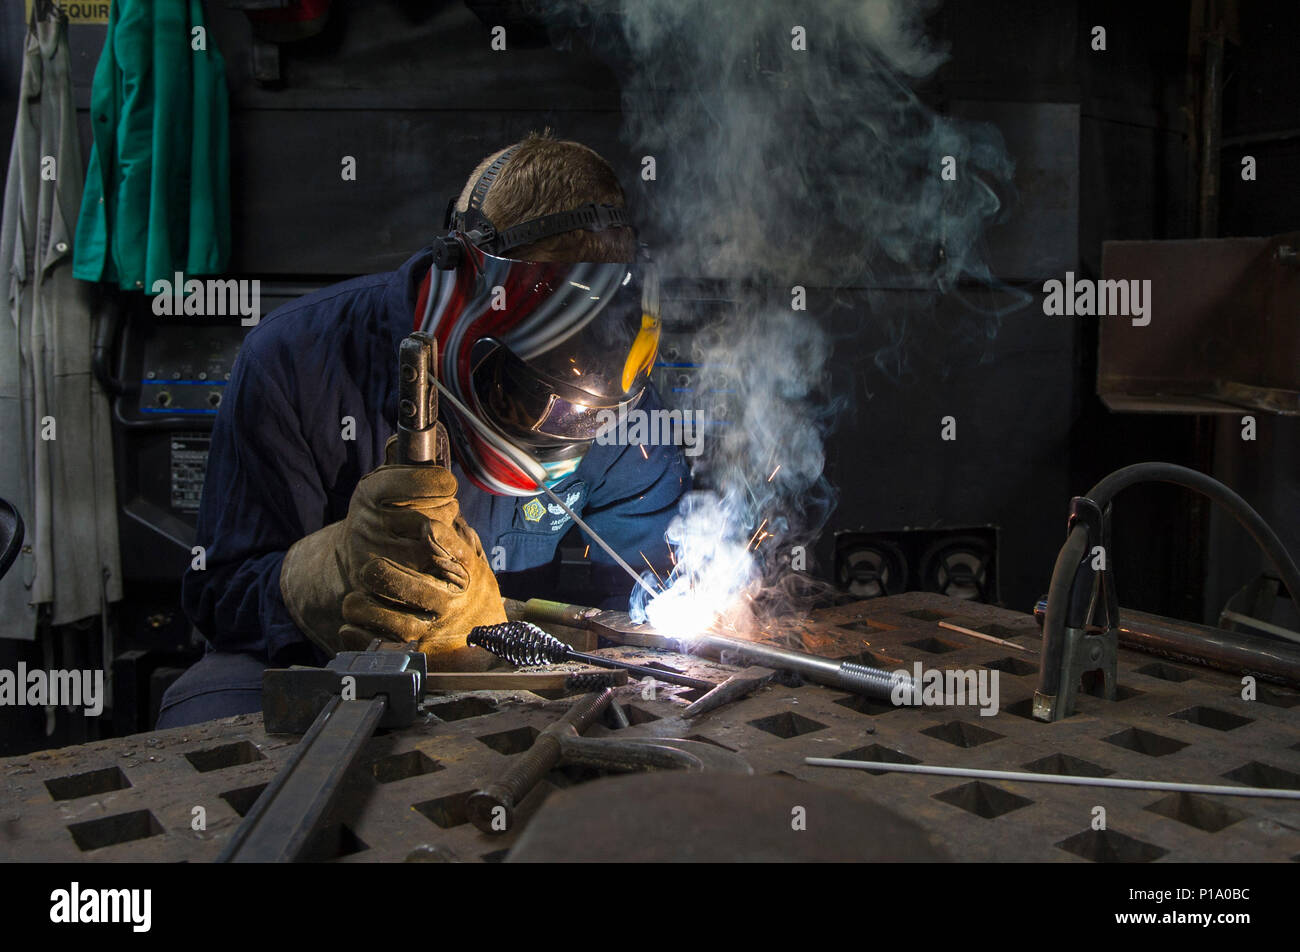 161001-N-WS581-053    ARABIAN GULF (Oct. 01, 2016) Petty Officer 3rd Class Jacob Keller, from Marshall, Ill., welds together an arm for a ballistic door in the repair shop of the aircraft carrier USS Dwight D. Eisenhower (CVN 69) (Ike). Keller serves aboard Ike as a hull maintenance technician and is responsible for metal work on the ship. Ike and its Carrier Strike Group are deployed in support of Operation Inherent Resolve, maritime security operations and theater security cooperation efforts in the U.S. 5th Fleet area of operations. (U.S. Navy photo by Petty Officer 3rd Class Andrew J. Snee Stock Photo